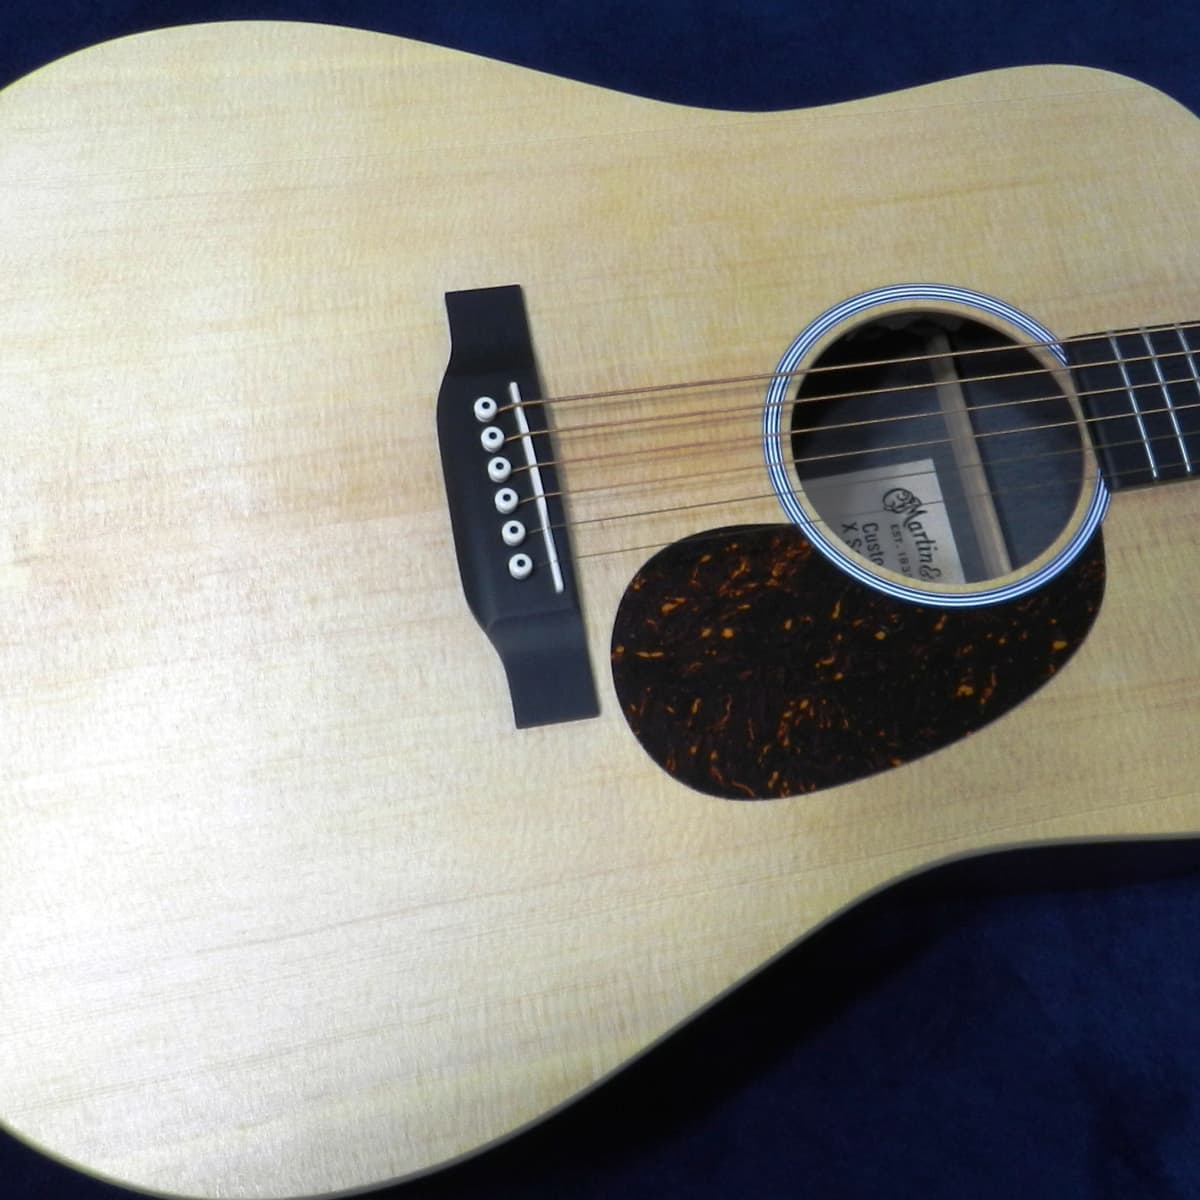 Martin DX1AE Acoustic-Electric Guitar Review - Spinditty